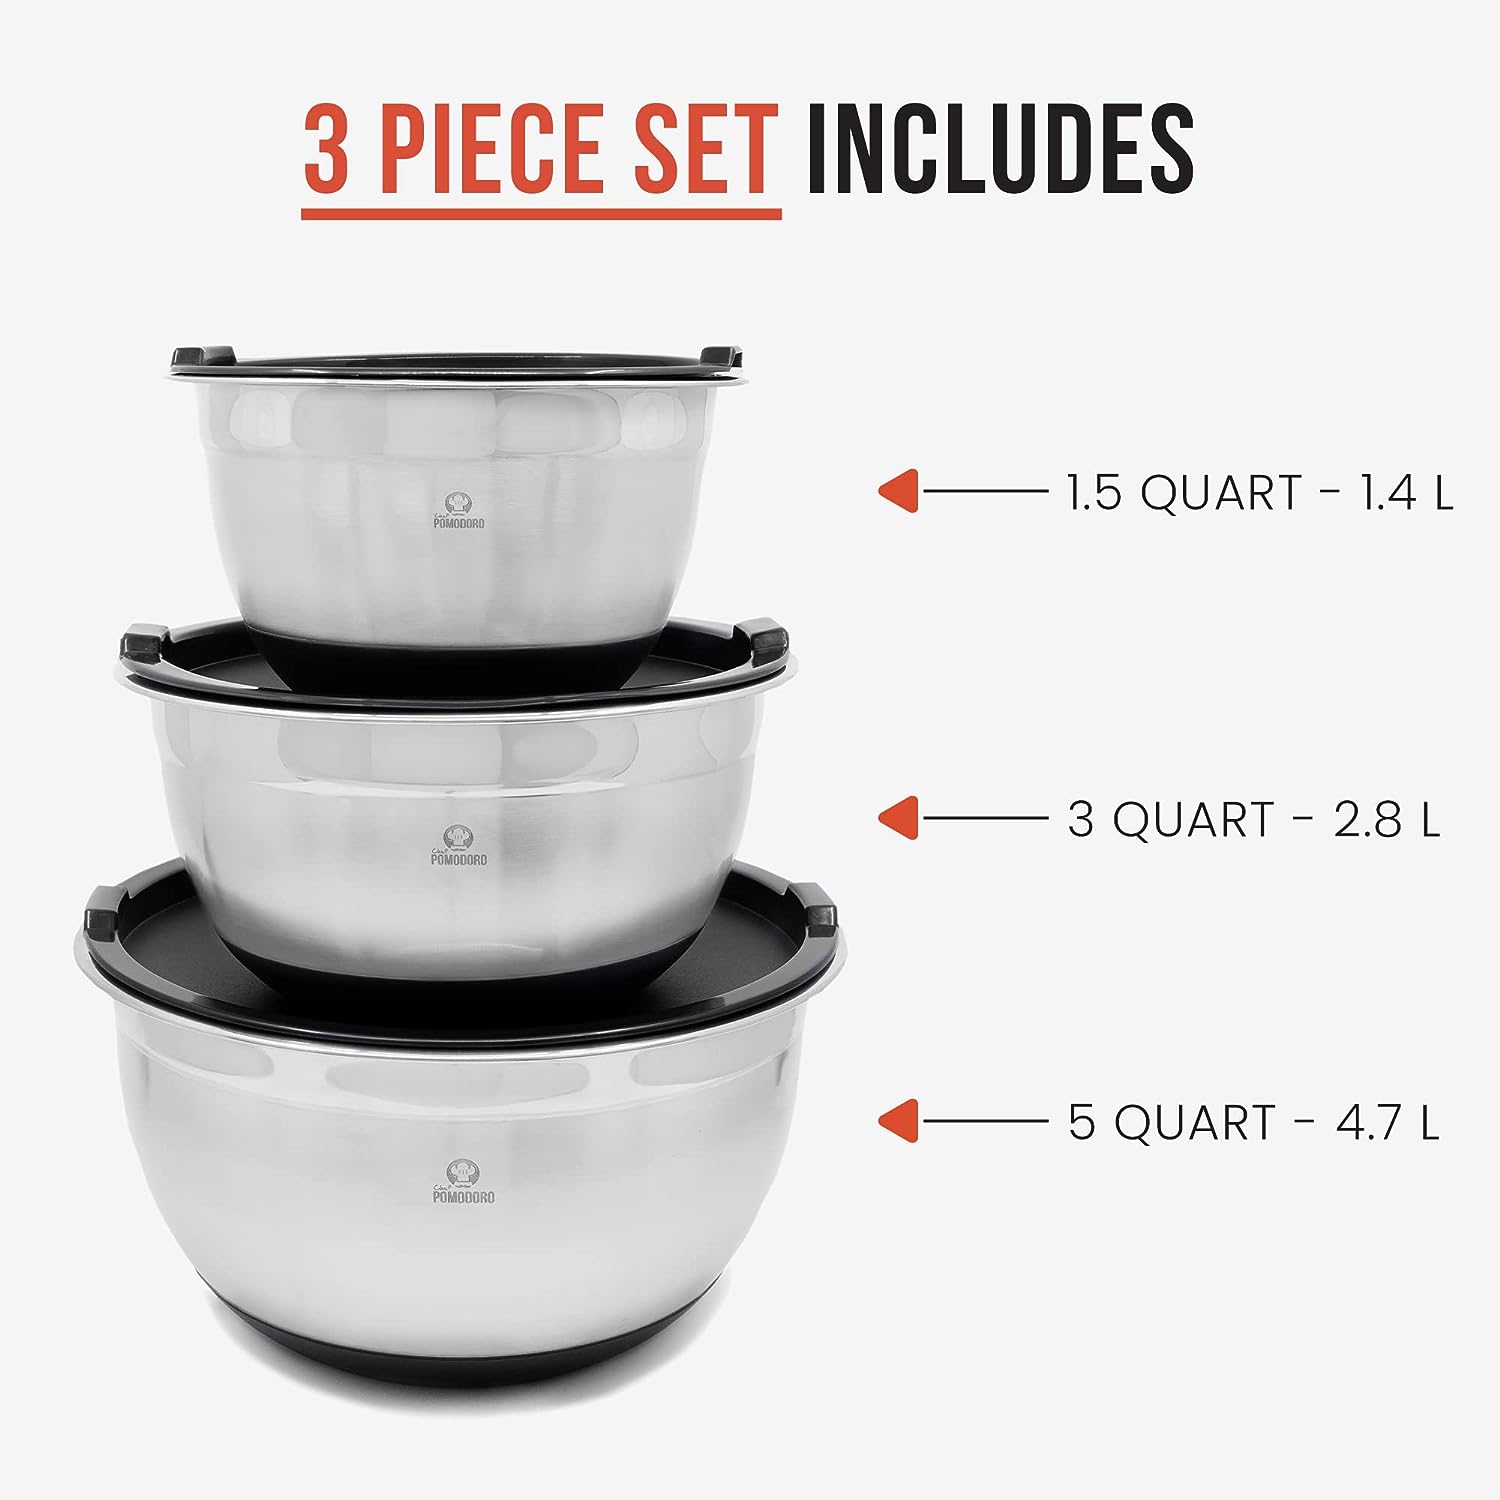 1.5 Qt Stainless Steel Mixing Bowls for Kitchen, Baking, Cooking Prep (5  Piece Set)